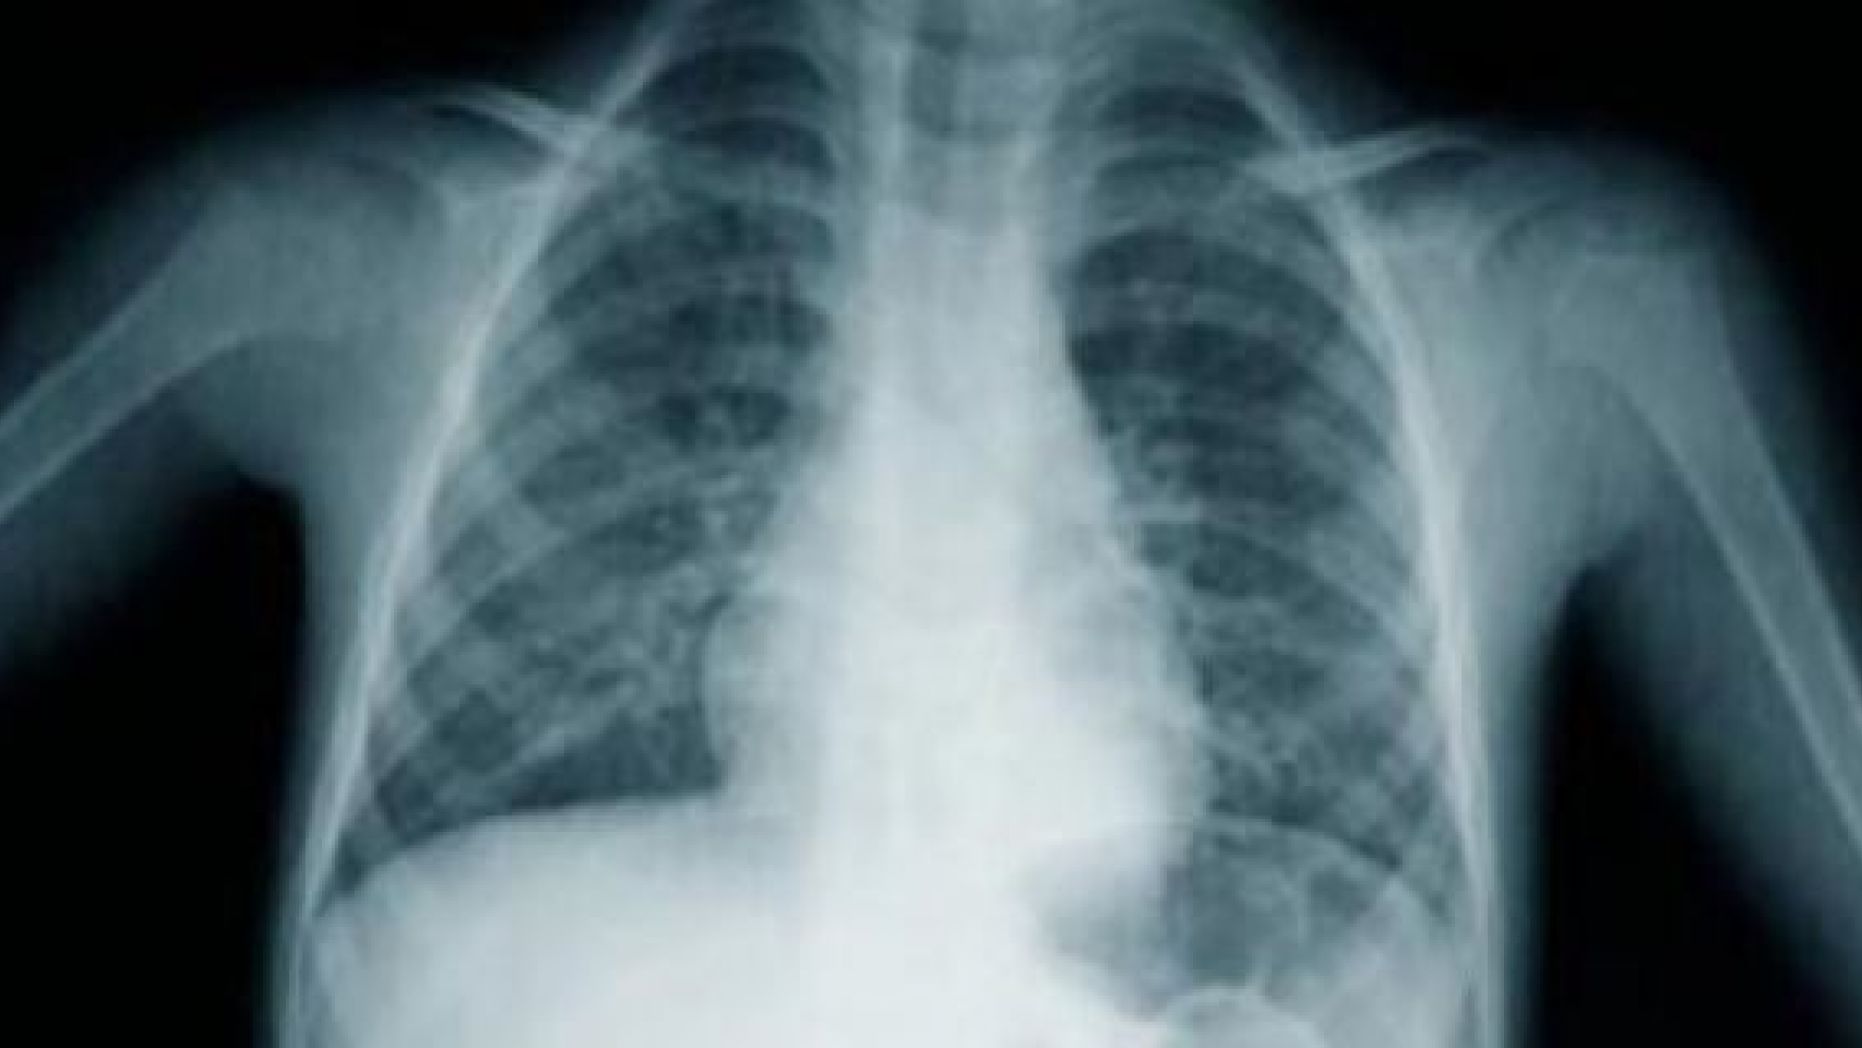 Lung cancer screening most useful in high-risk people